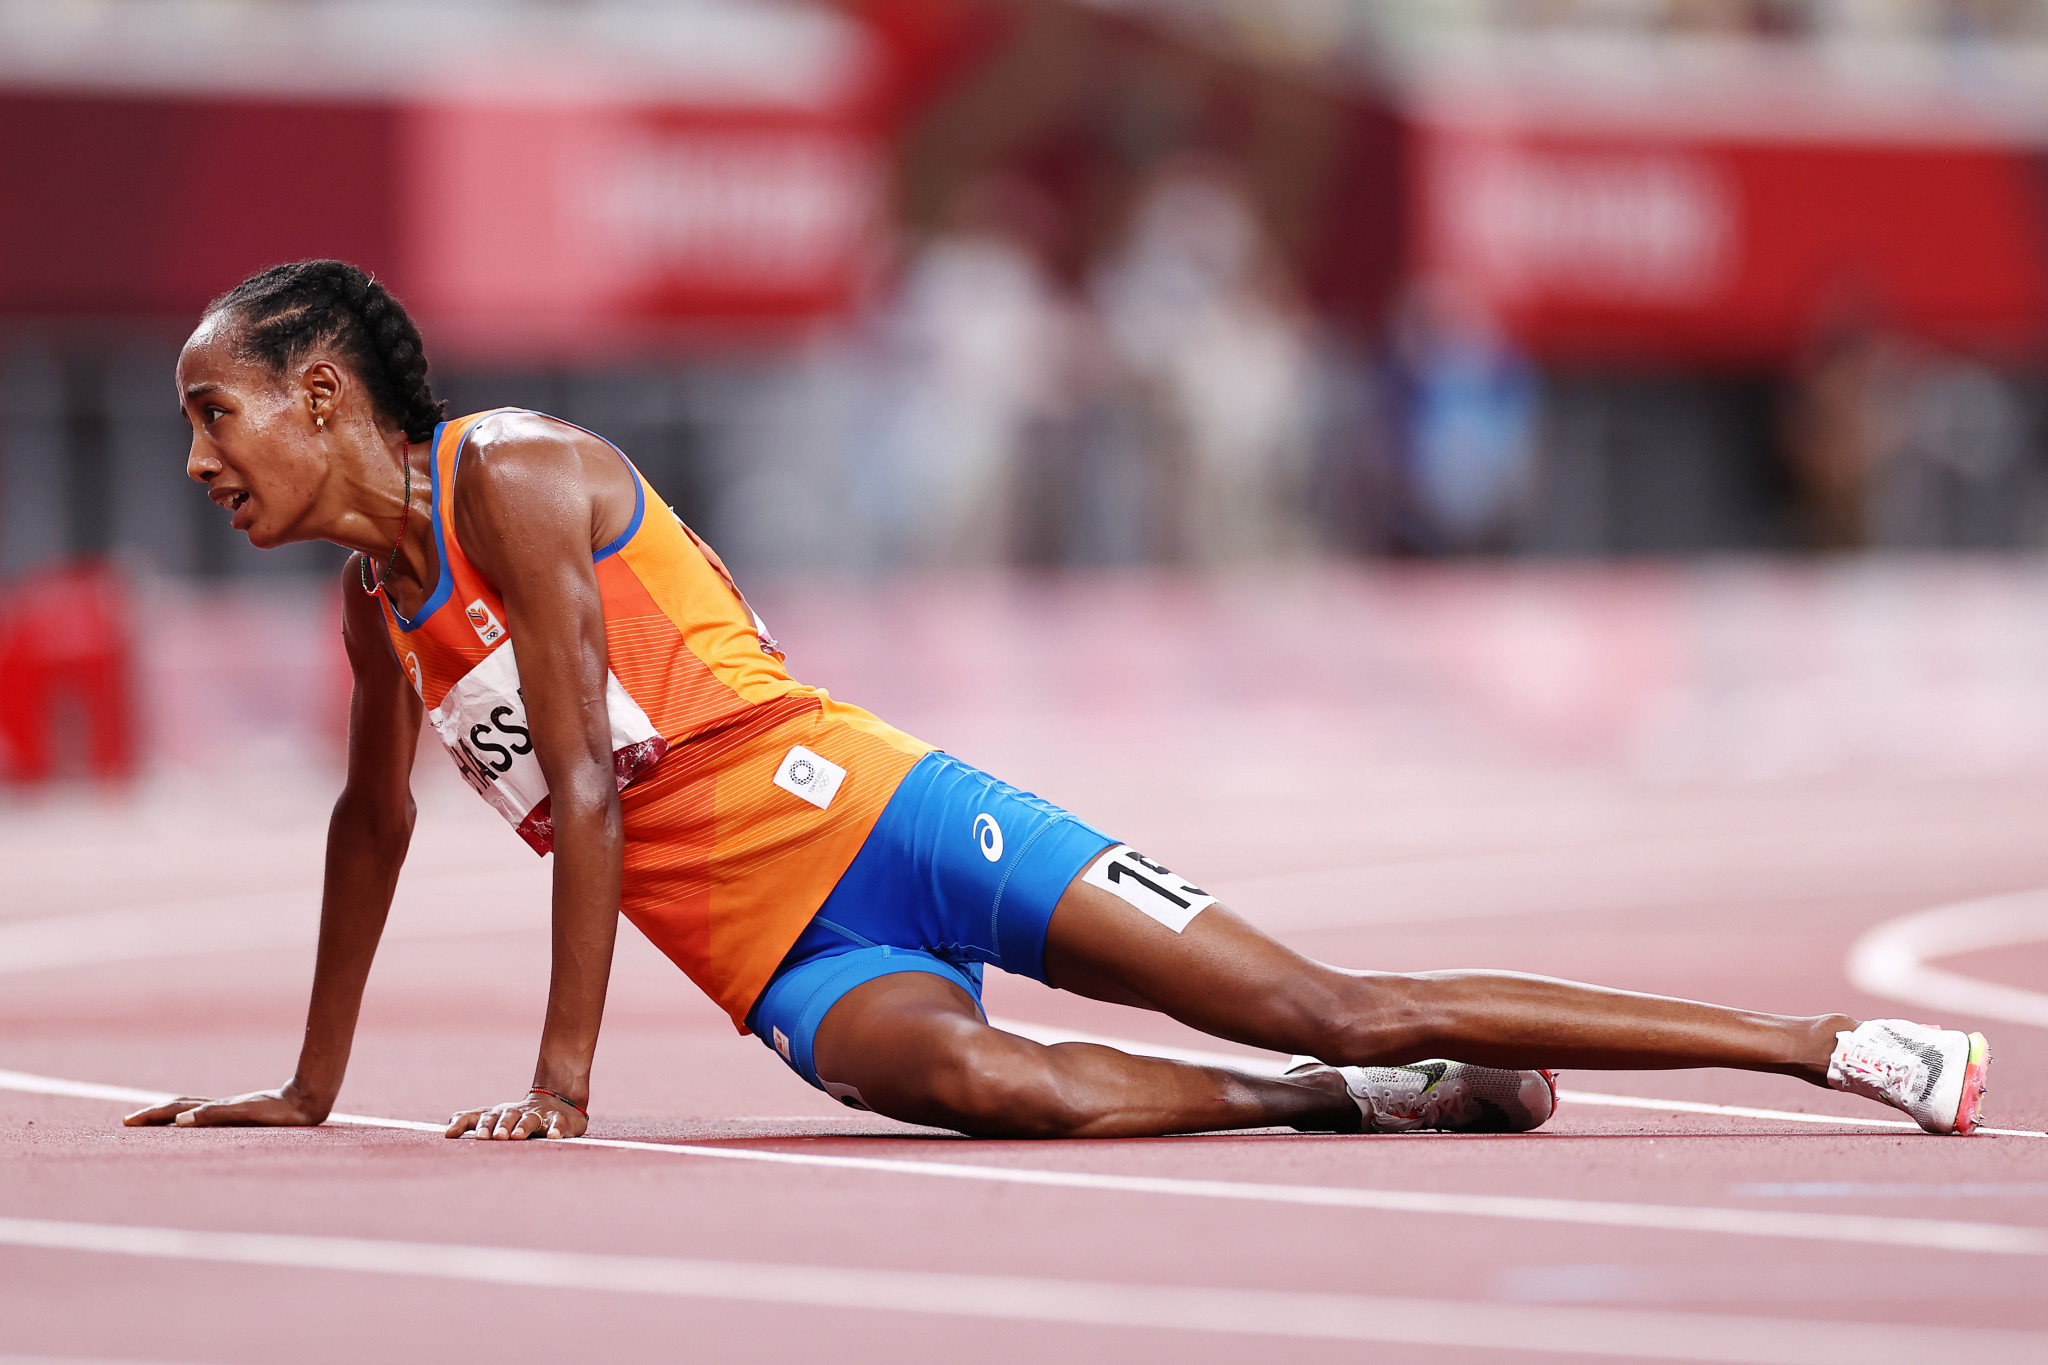 Several runners, including The Netherlands' Sifan Hassan, winner of the 10,000 metres, finished in distress during Tokyo 2020 due to the hot conditions ©Getty Images